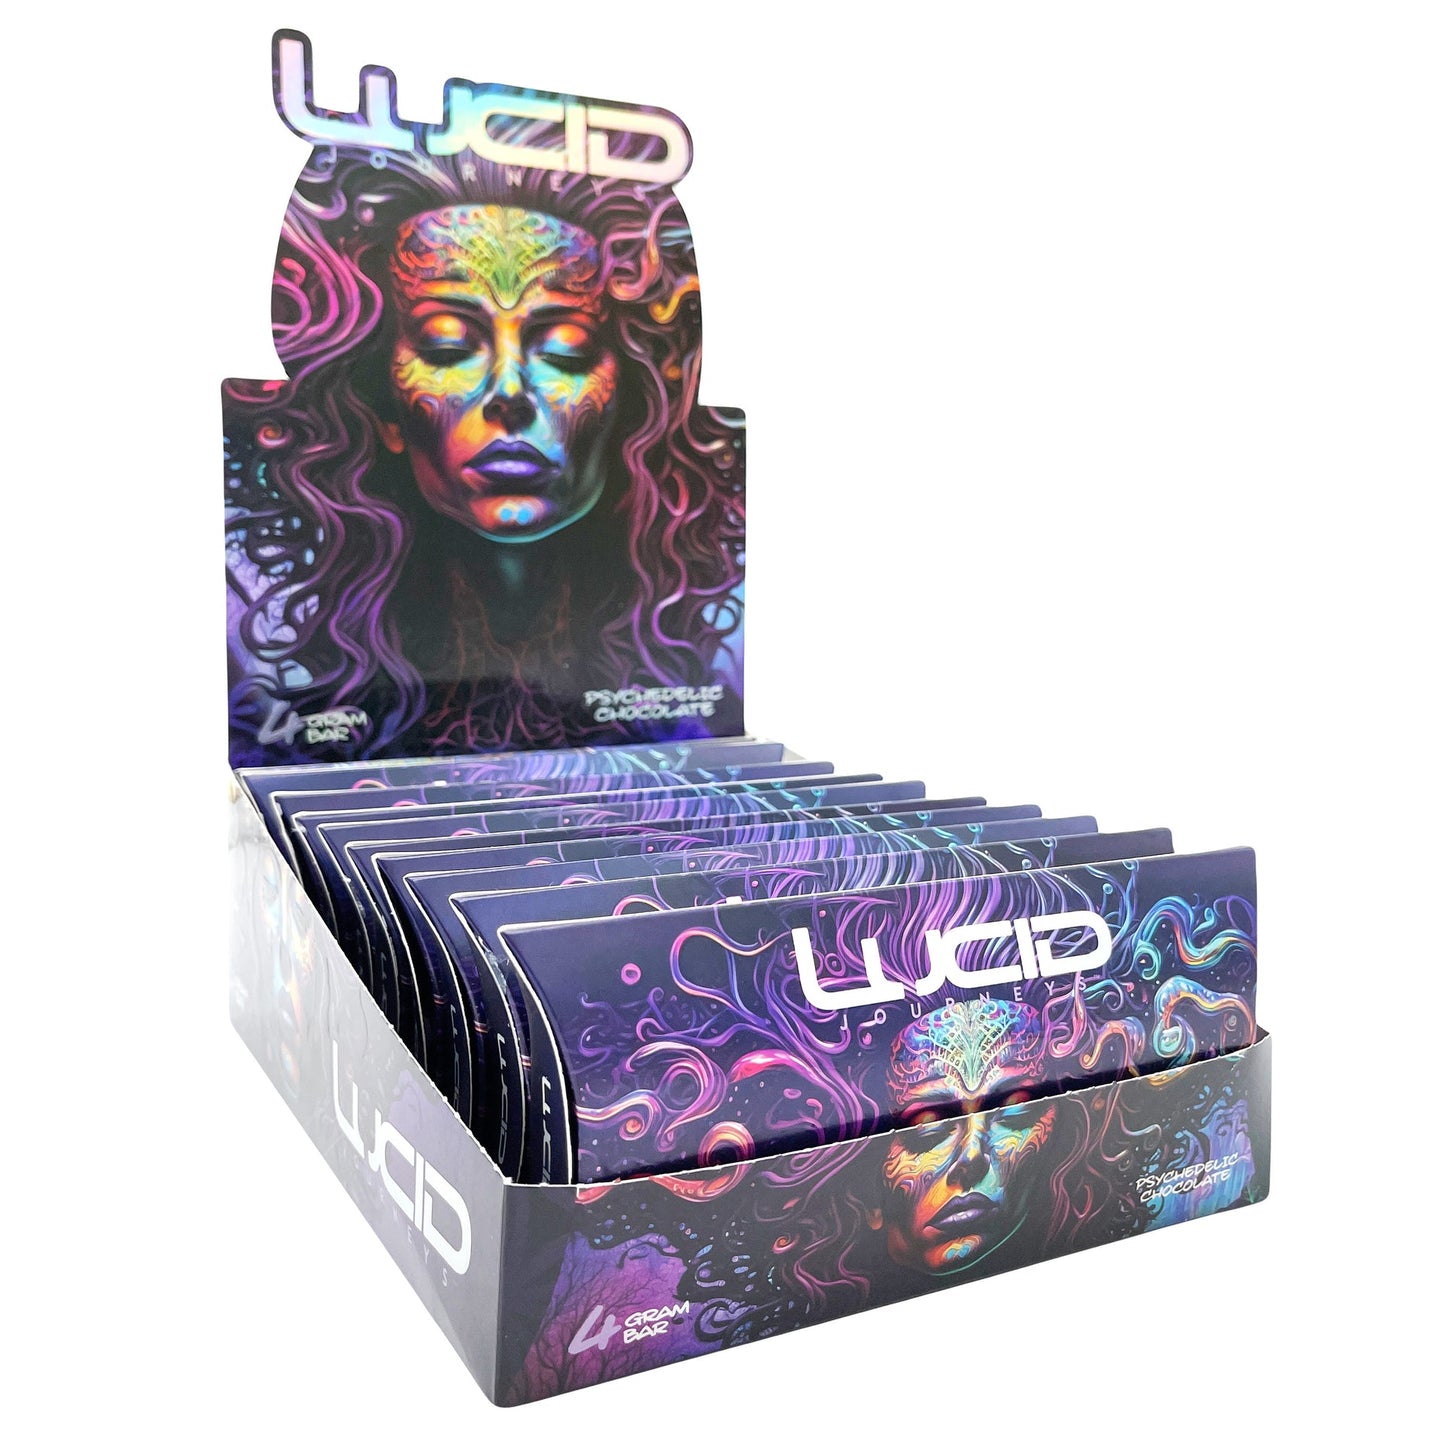 LUCID JOURNEYS PSYCHEDELIC CHOCOLATE 10CT DISPLAY